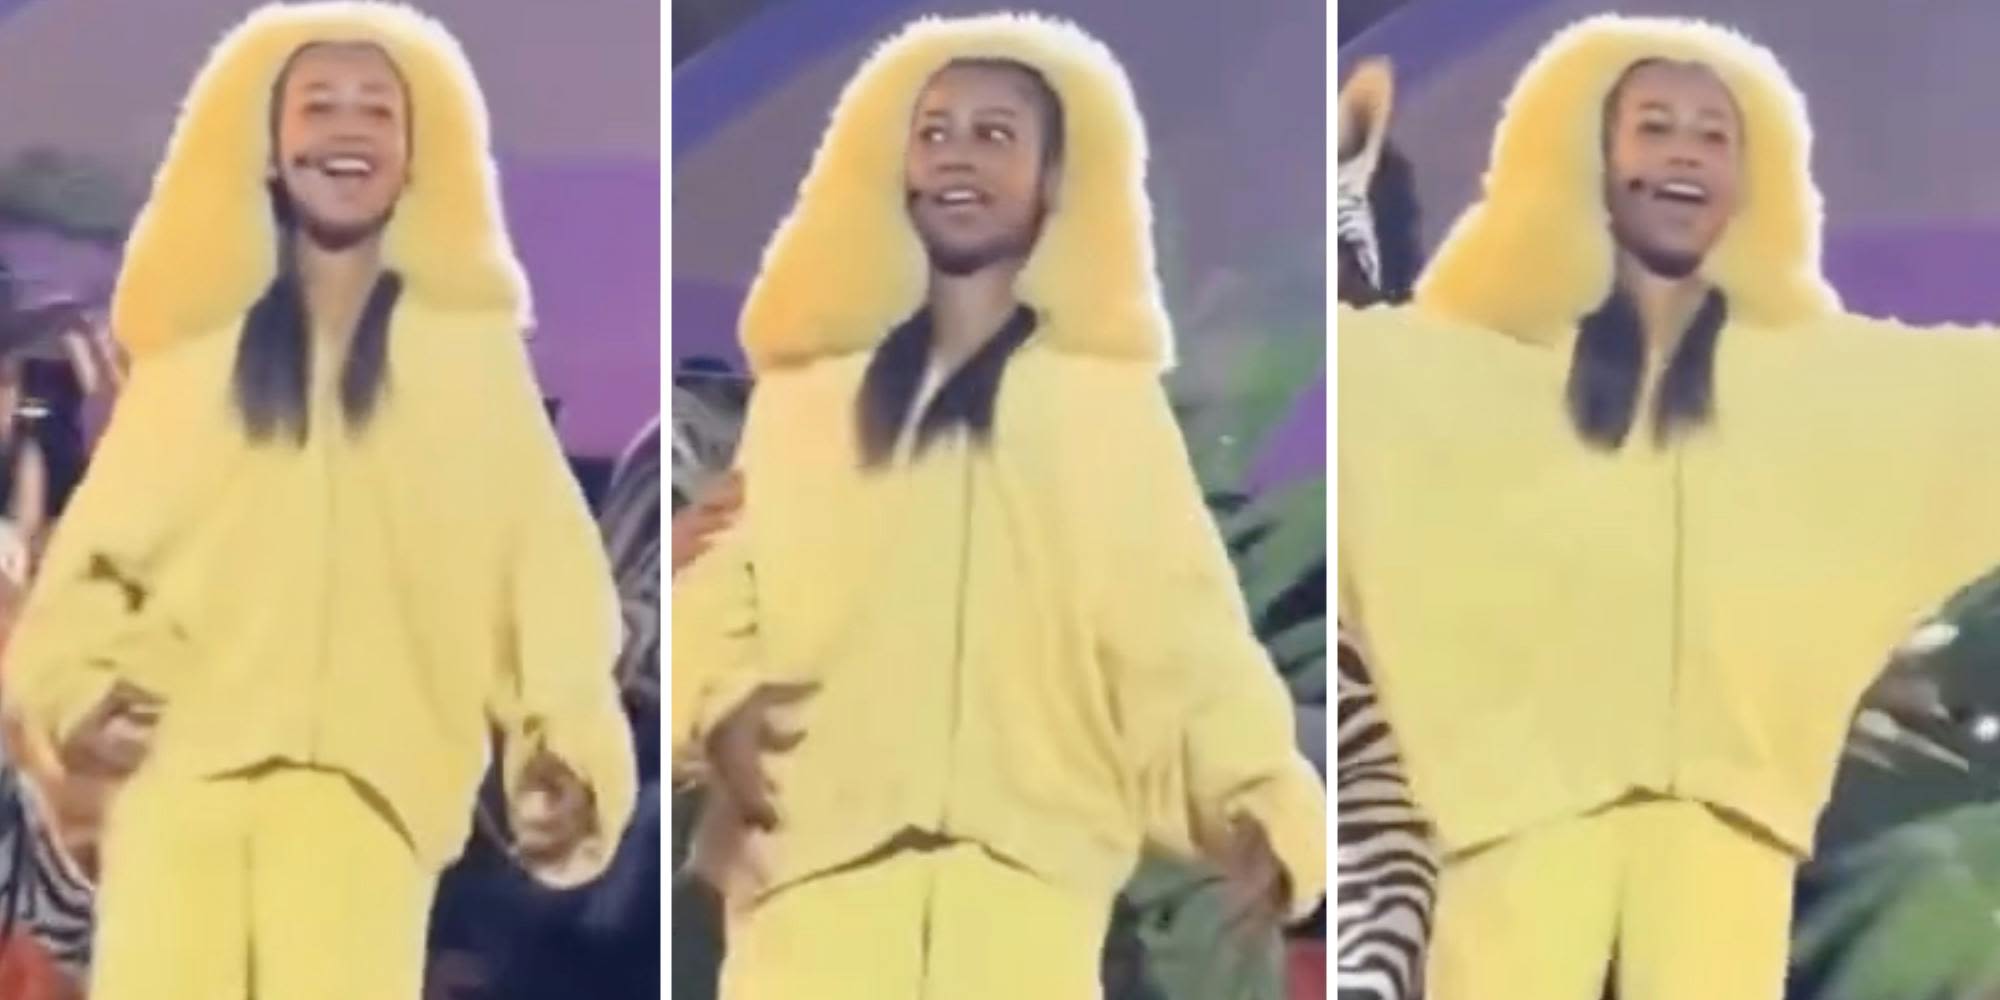 ‘She’s realizing she’s not good’: The Internet reacts to North West’s ‘Lion King’ performance